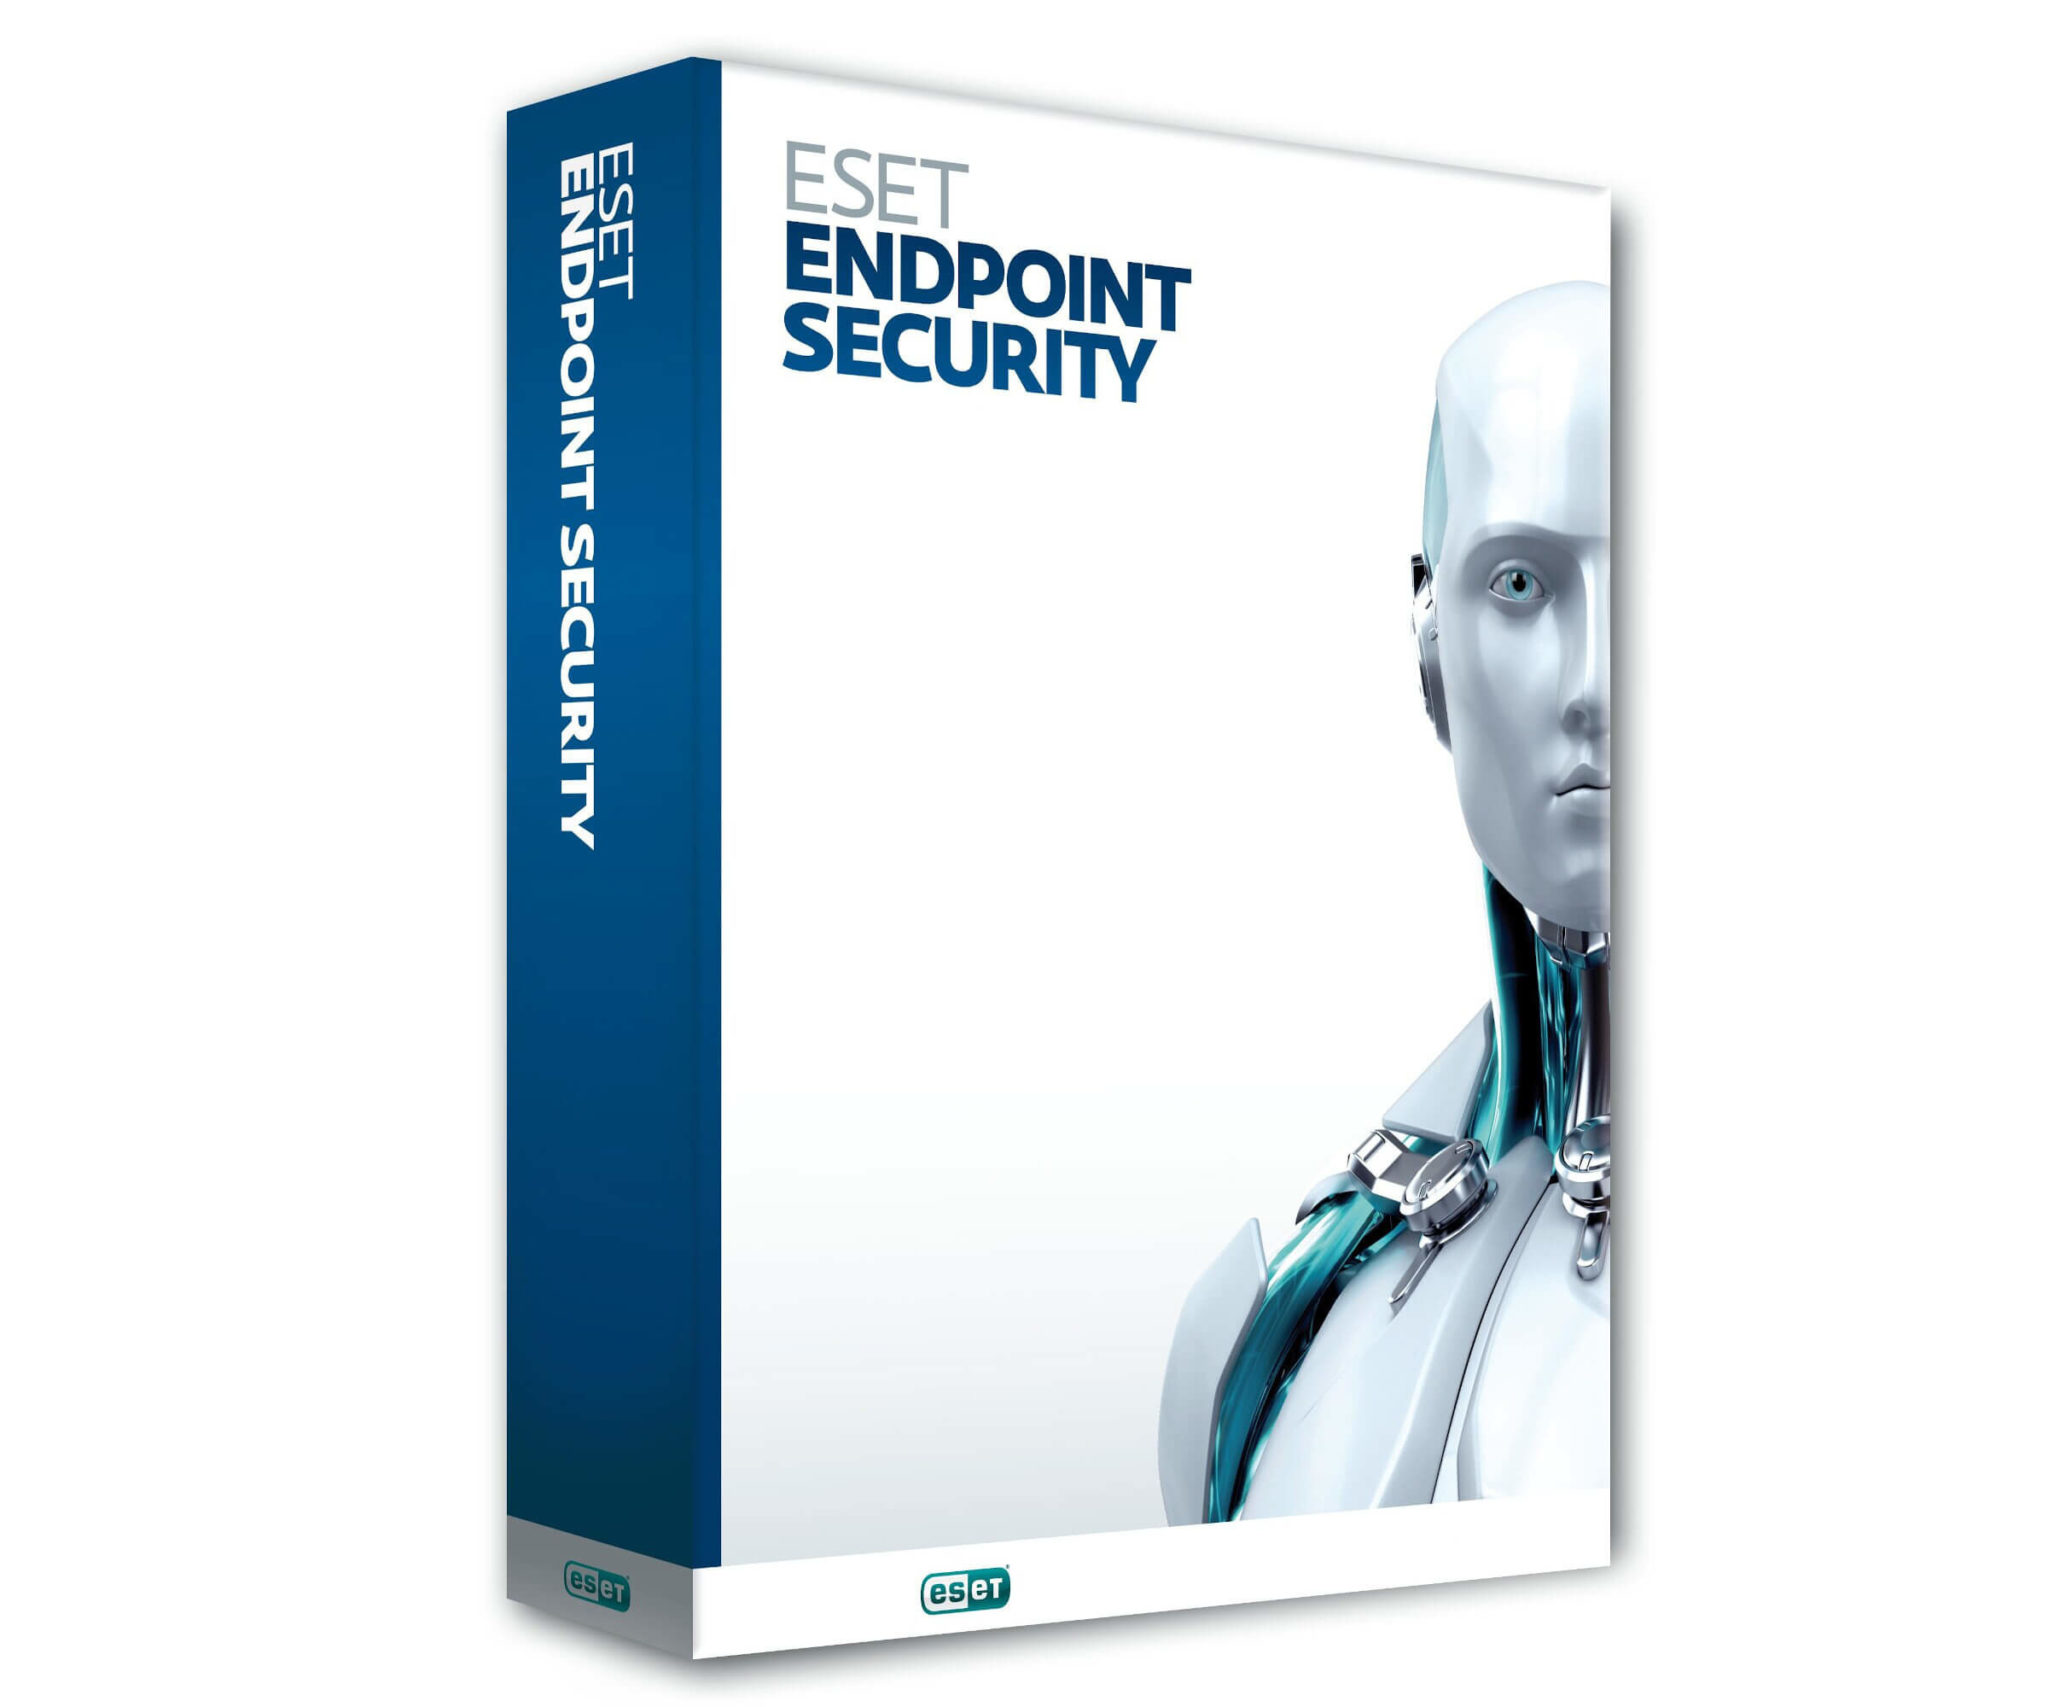 ESET Endpoint Security 10.1.2058.0 for windows download